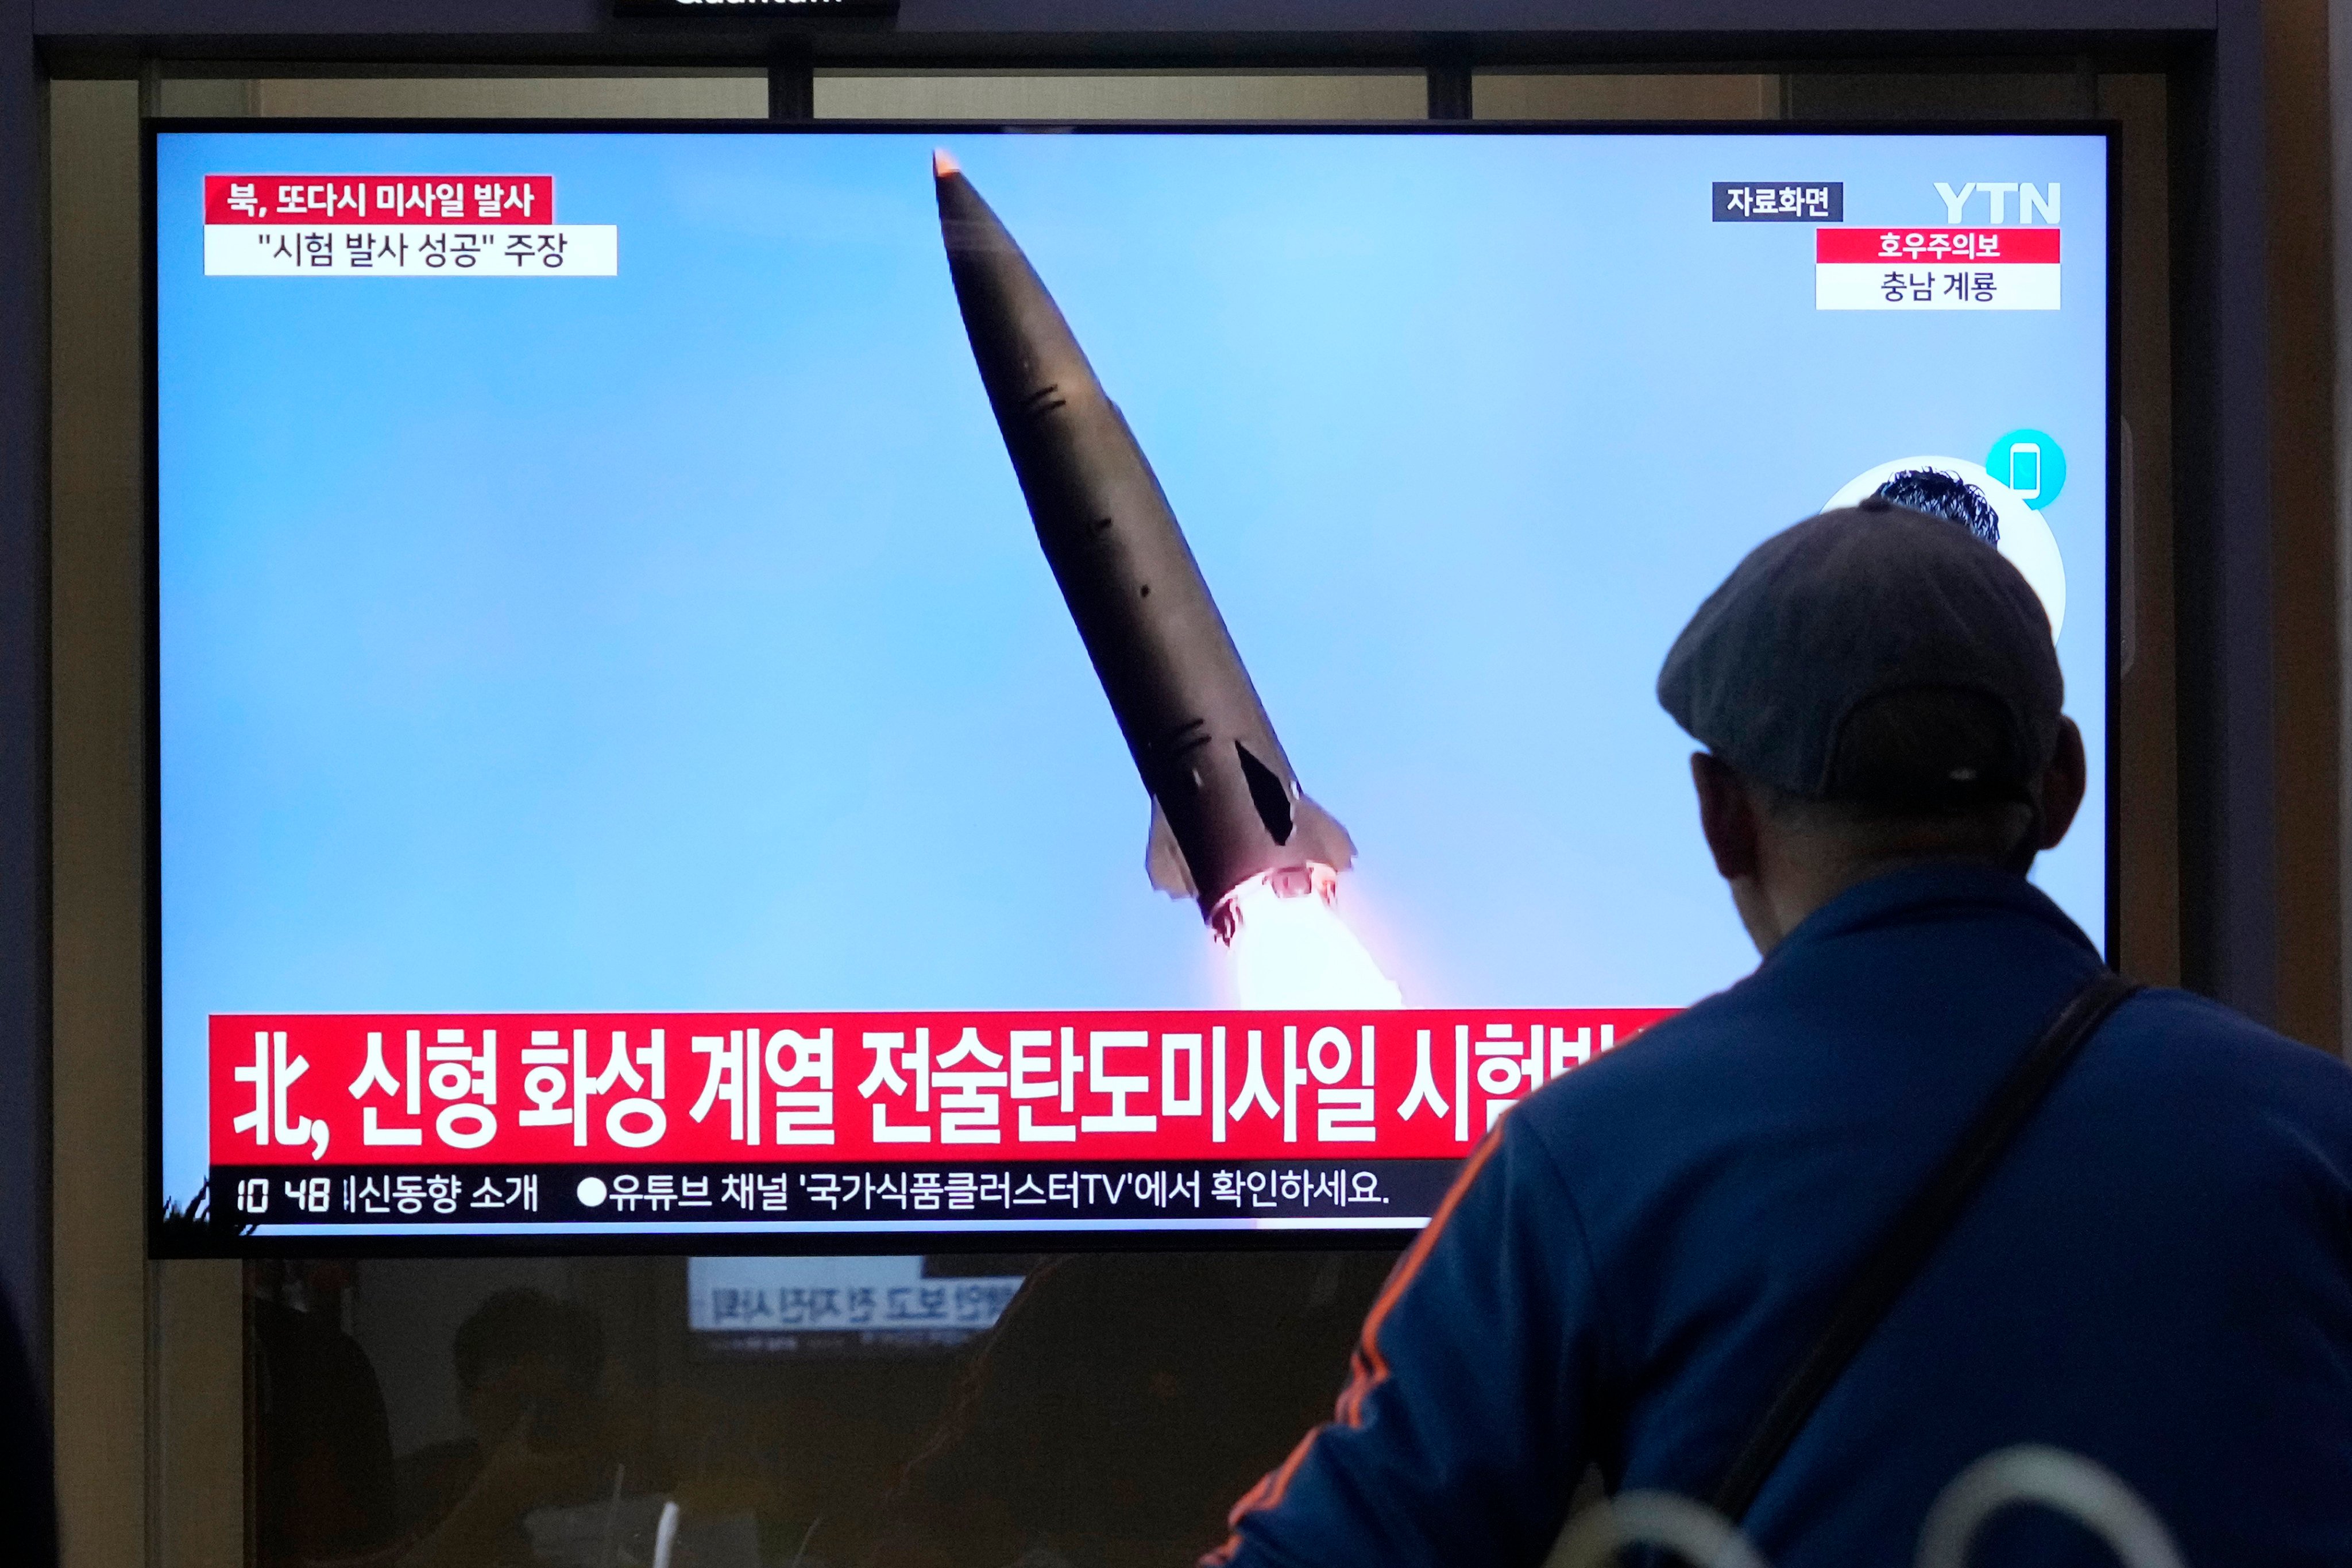 A file image of a North Korean missile launch is displayed on a screen at Seoul Railway Station in South Korea on July 2. Photo: AP